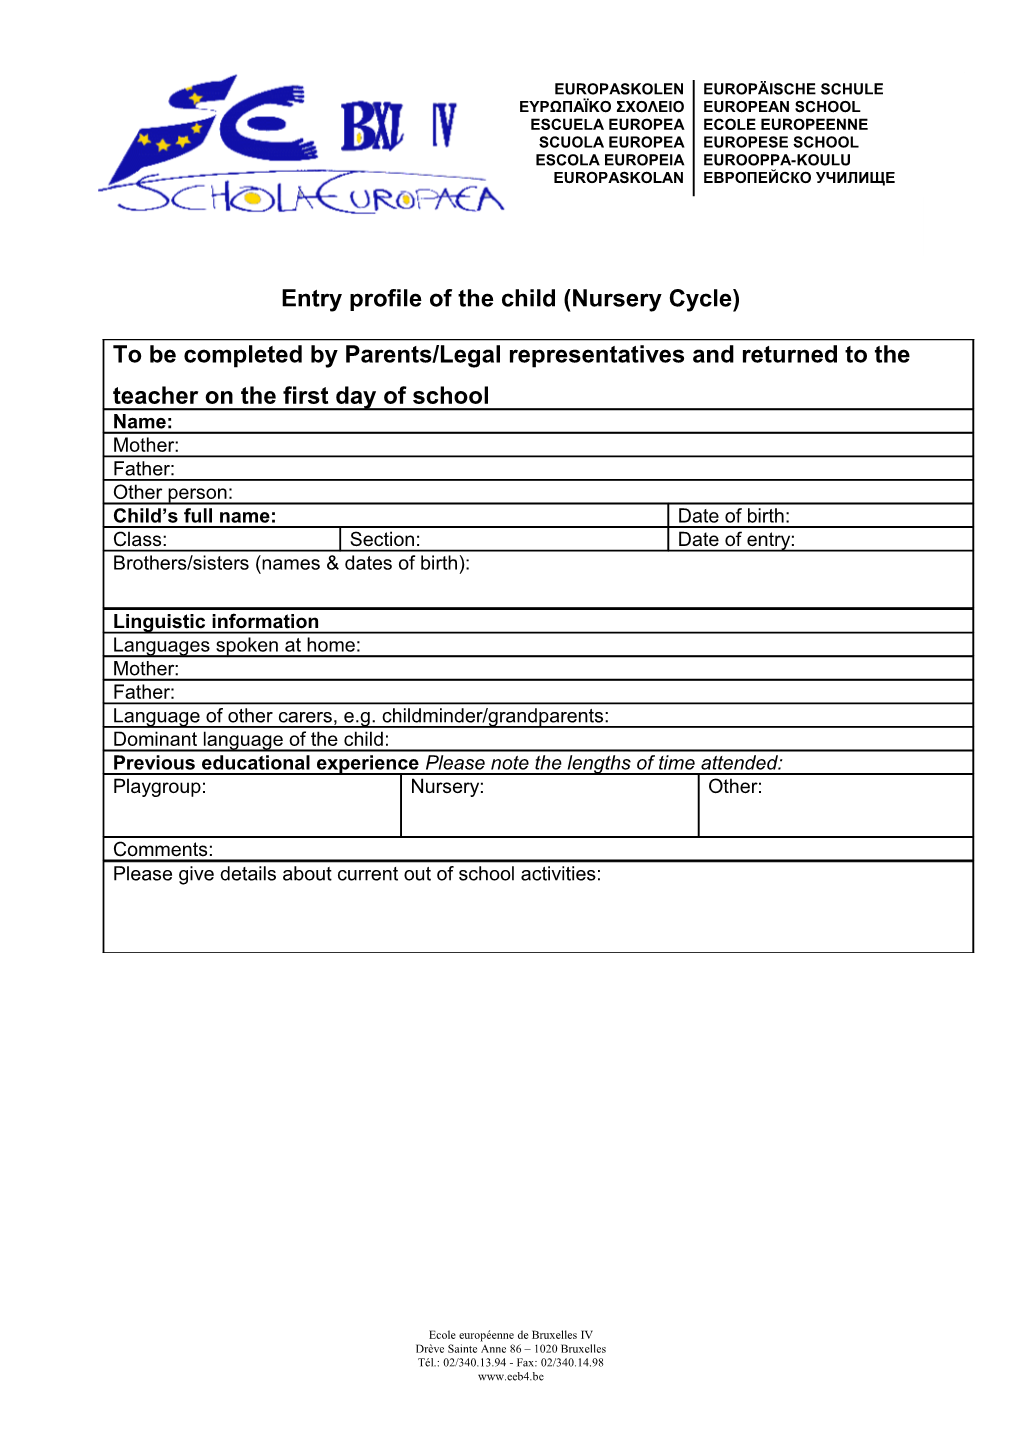 Entry Profile of the Child (Nursery Cycle)